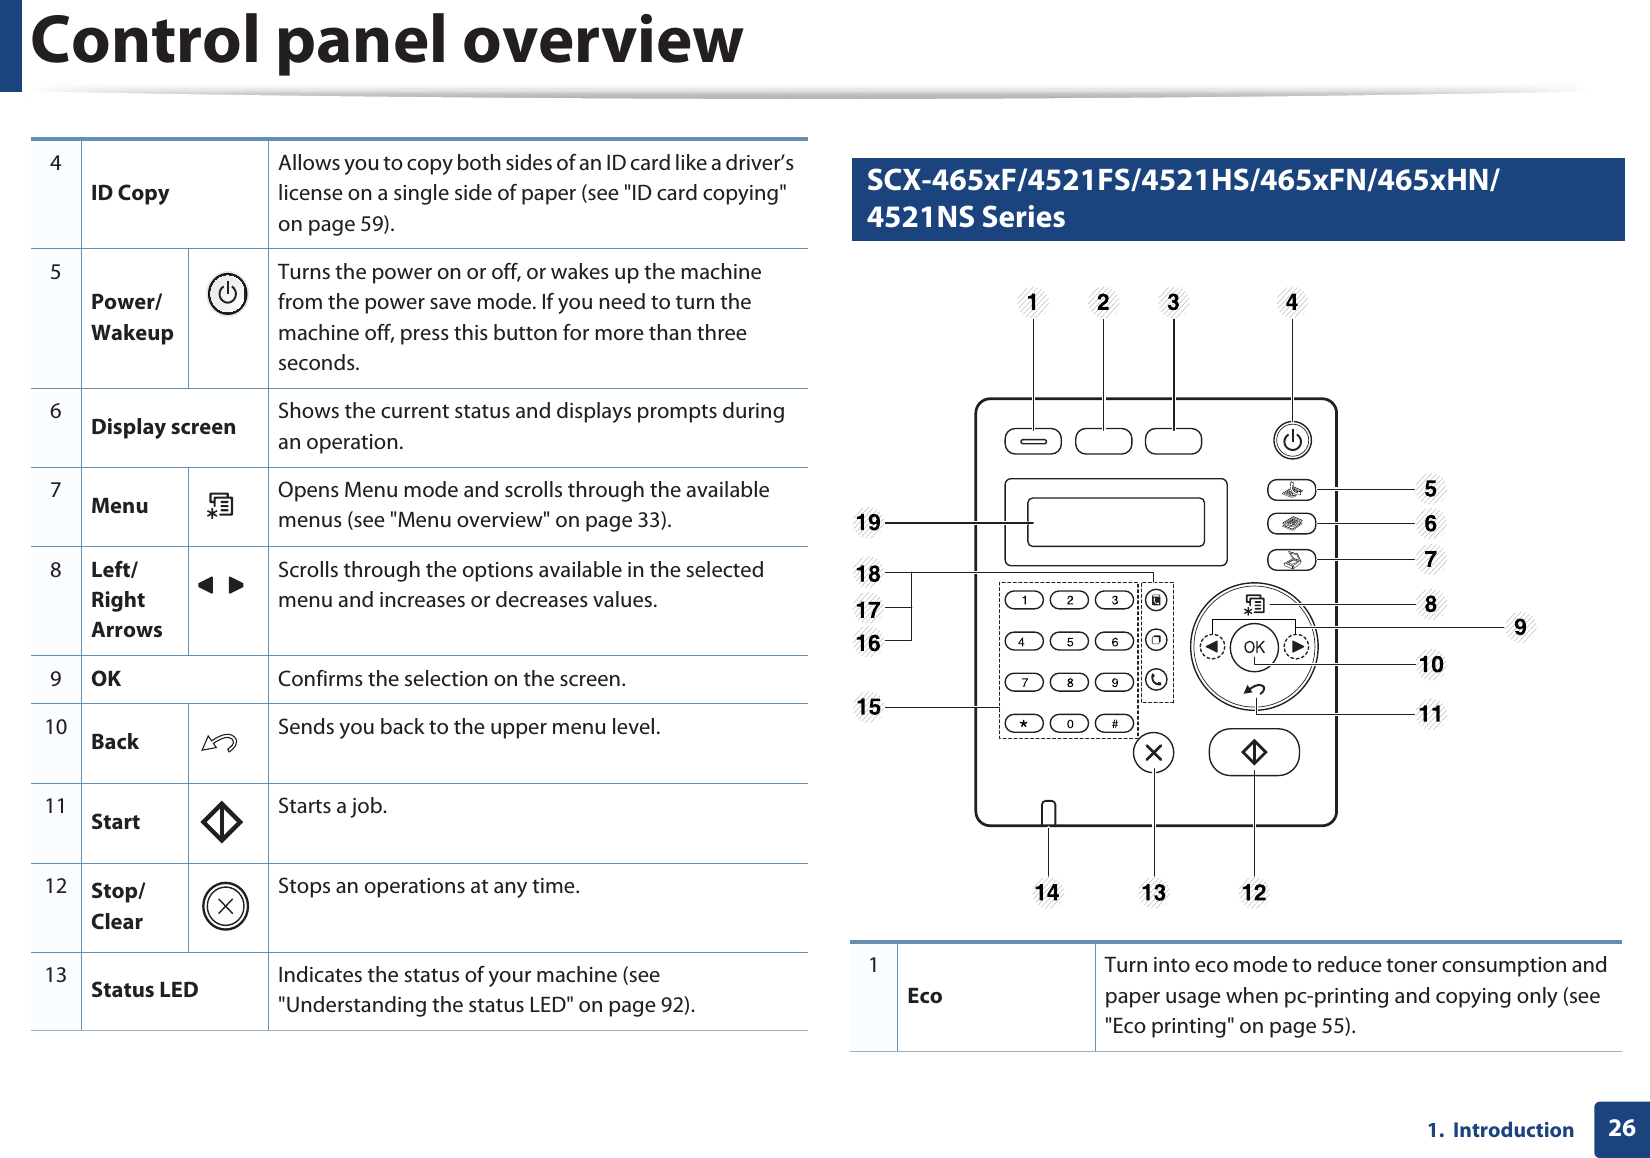 Control panel overview261.  Introduction13 SCX-465xF/4521FS/4521HS/465xFN/465xHN/4521NS Series4ID CopyAllows you to copy both sides of an ID card like a driver’s license on a single side of paper (see &quot;ID card copying&quot; on page 59). 5Power/WakeupTurns the power on or off, or wakes up the machine from the power save mode. If you need to turn the machine off, press this button for more than three seconds. 6Display screen Shows the current status and displays prompts during an operation.7Menu Opens Menu mode and scrolls through the available menus (see &quot;Menu overview&quot; on page 33).8Left/Right ArrowsScrolls through the options available in the selected menu and increases or decreases values. 9OK Confirms the selection on the screen. 10 Back Sends you back to the upper menu level.11 Start Starts a job.12 Stop/ClearStops an operations at any time. 13 Status LED Indicates the status of your machine (see &quot;Understanding the status LED&quot; on page 92). 1EcoTurn into eco mode to reduce toner consumption and paper usage when pc-printing and copying only (see &quot;Eco printing&quot; on page 55).